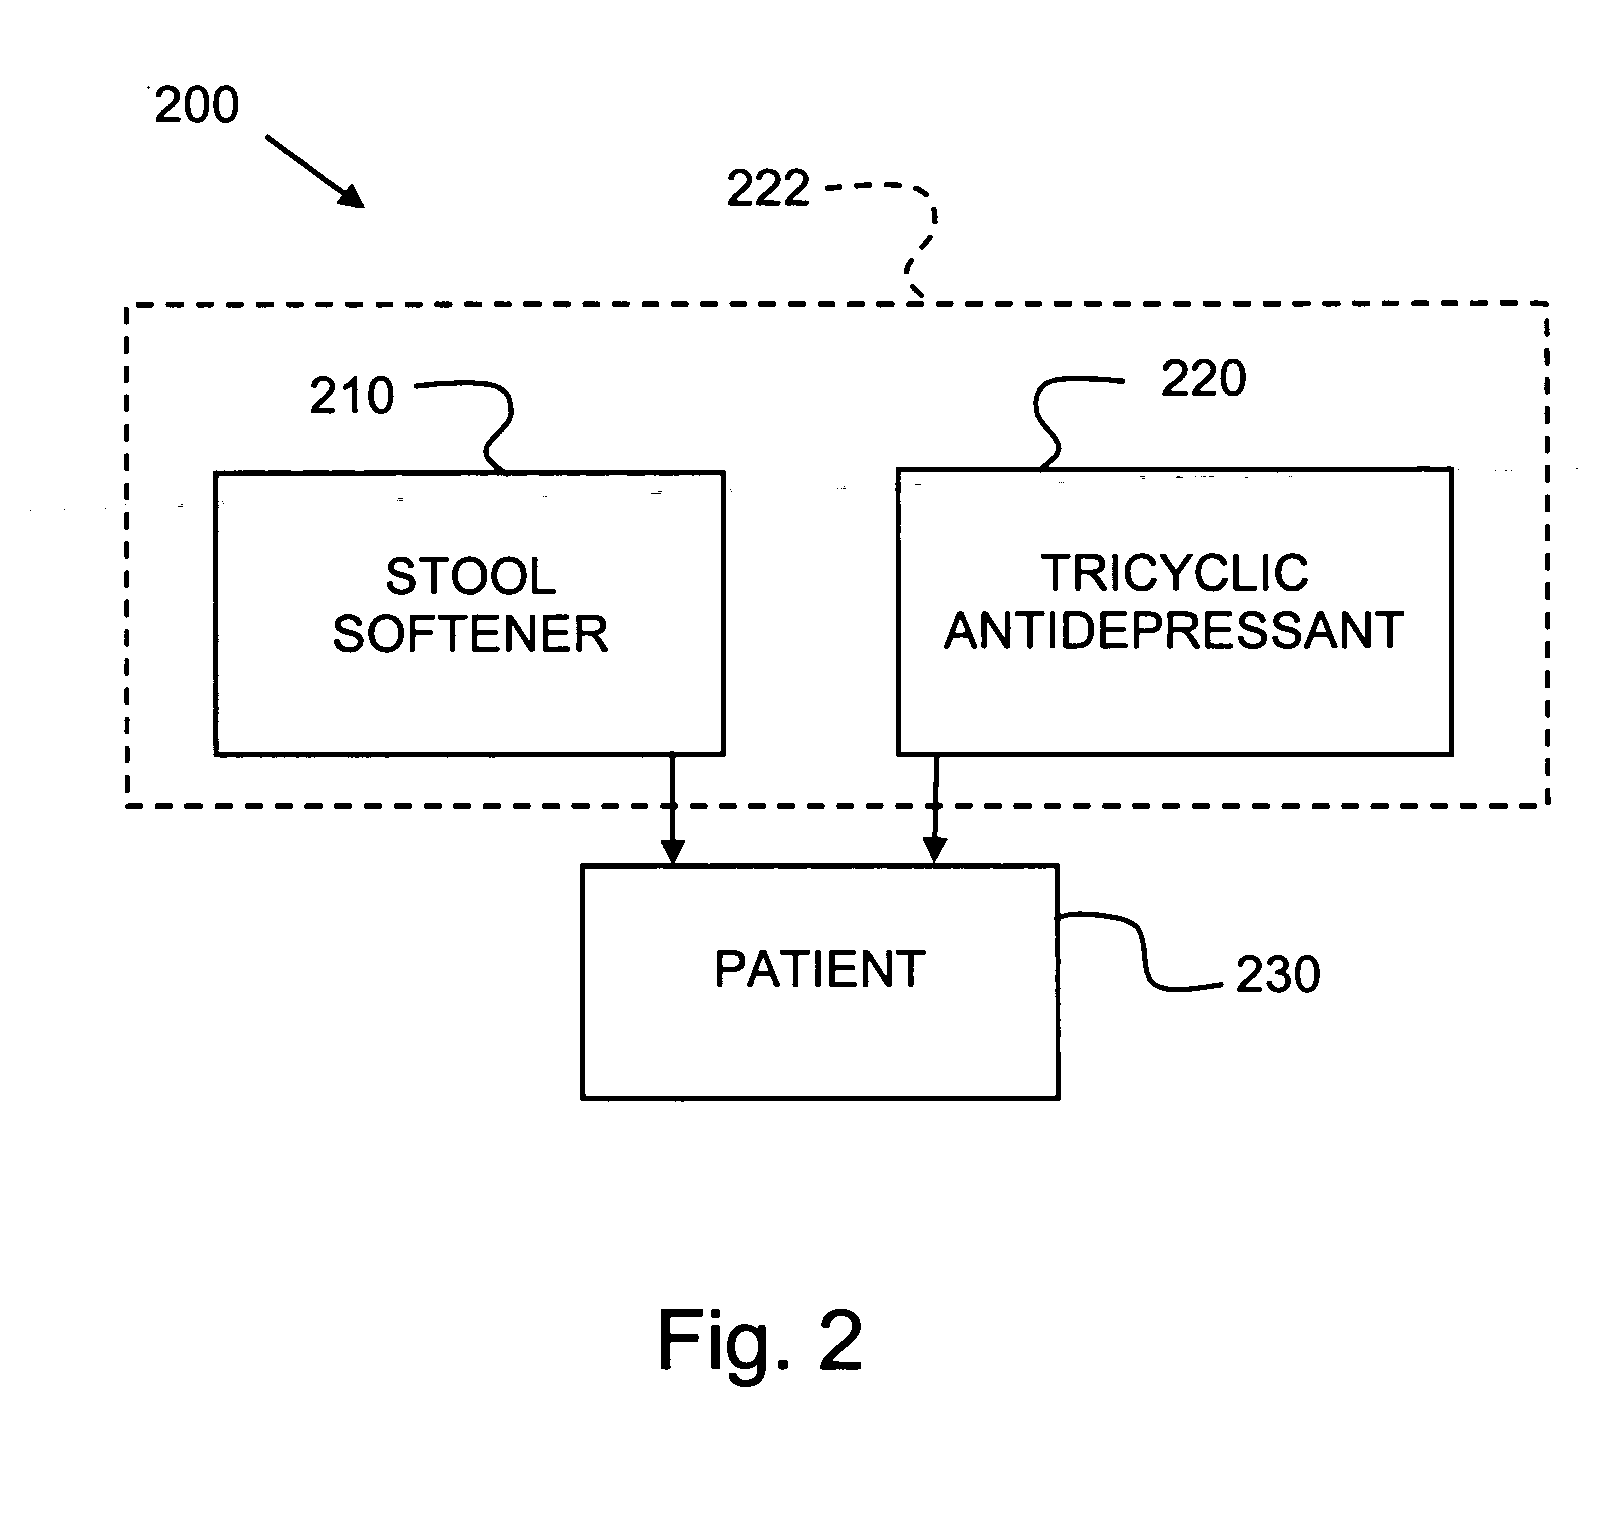 Method and medicine for treating gastrointestinal disorder including irritable bowel syndrome